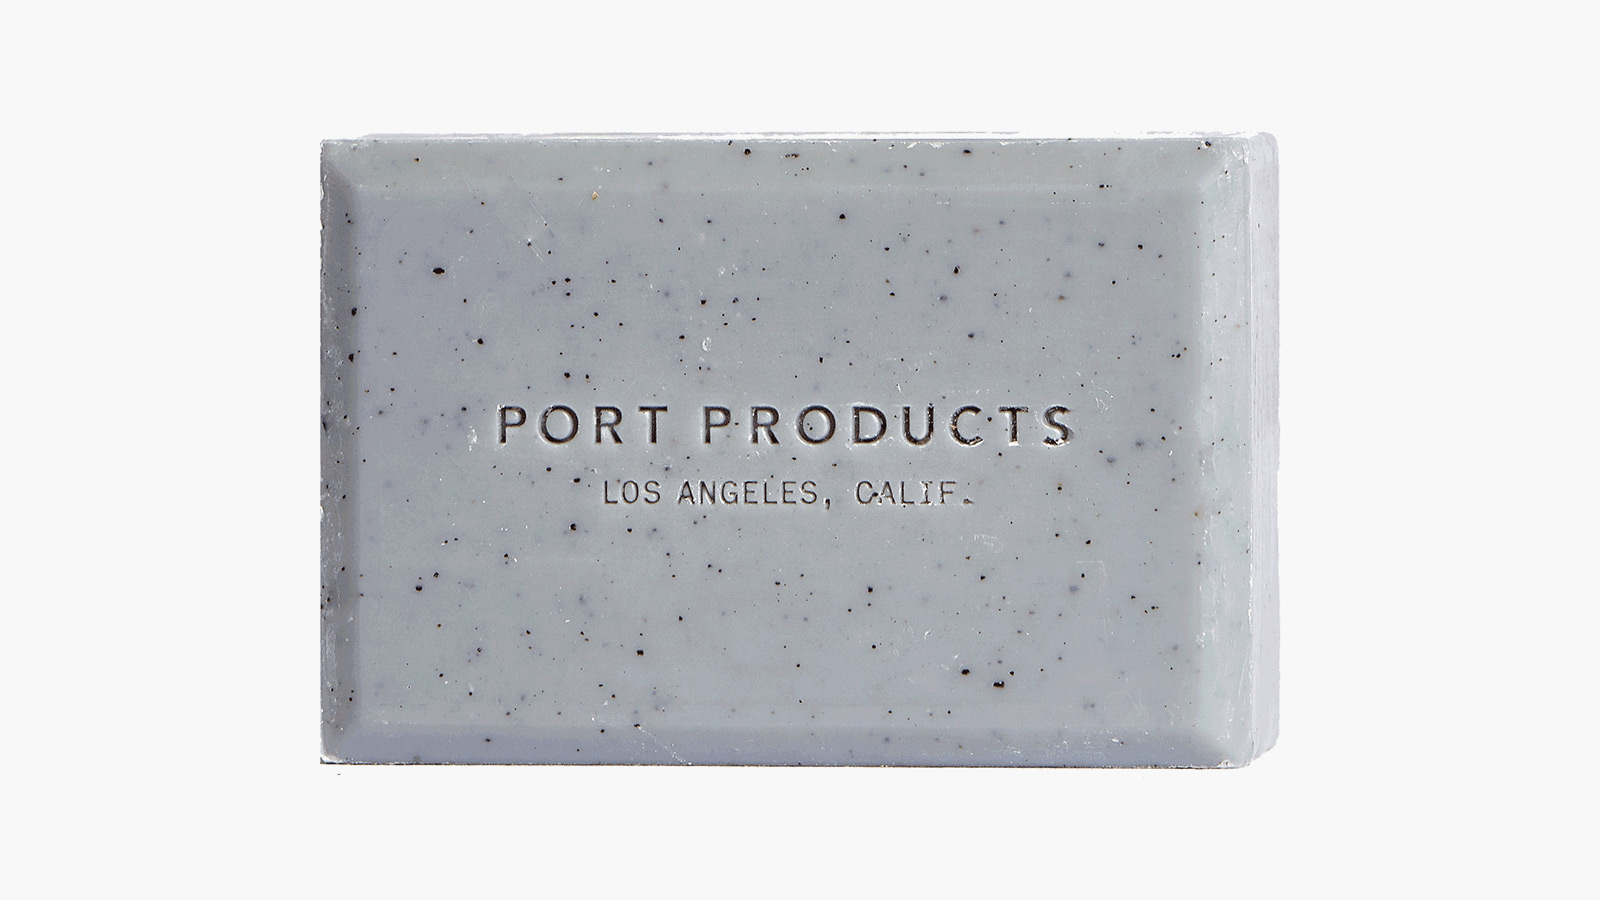 Port Products Marine Layer Sand Bar Exfoliating Body Soap